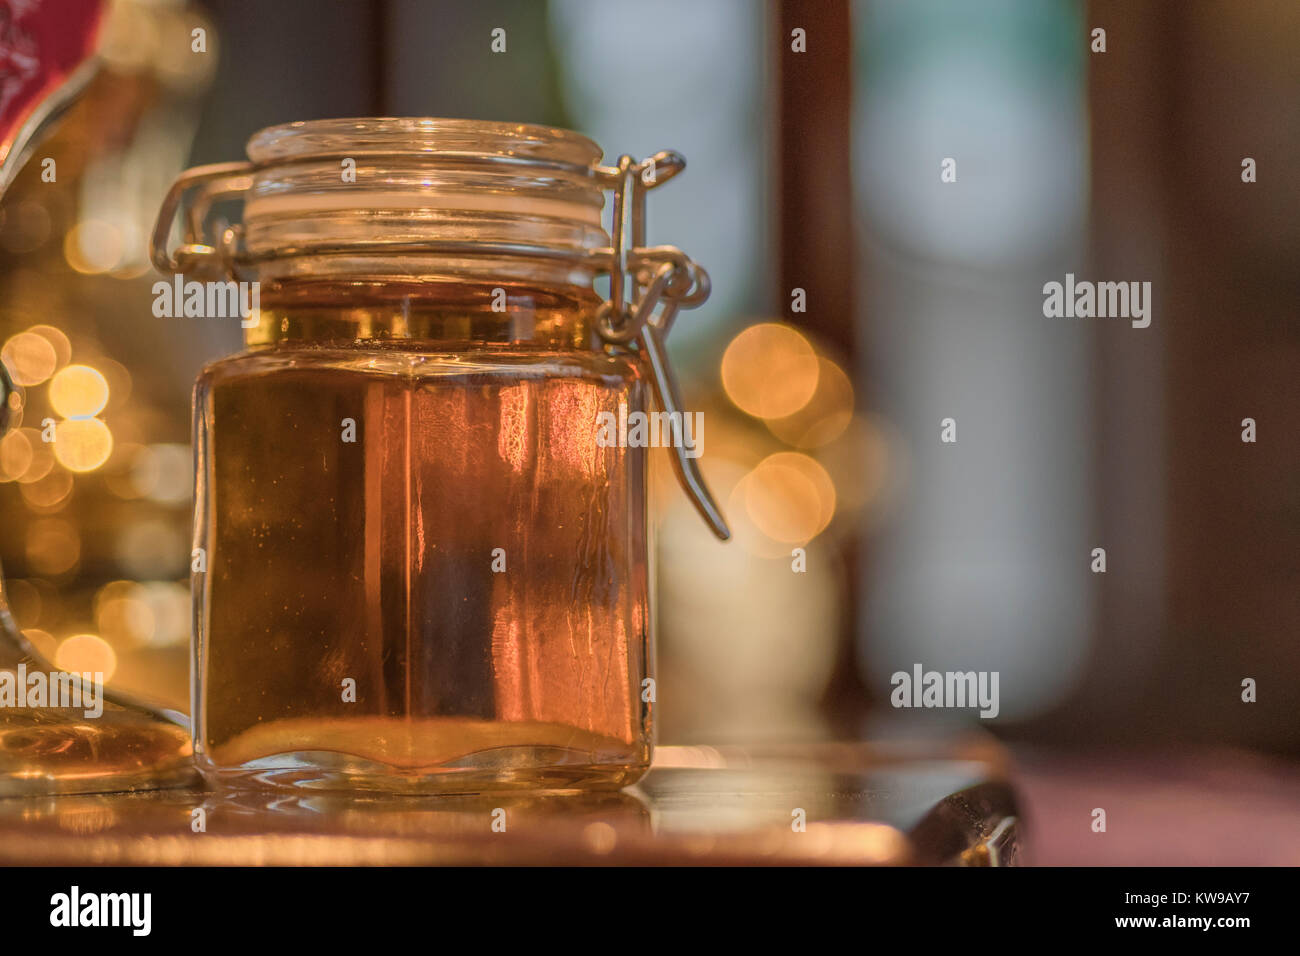 Small jar with a sample of a real ale in a Pub. Stock Photo